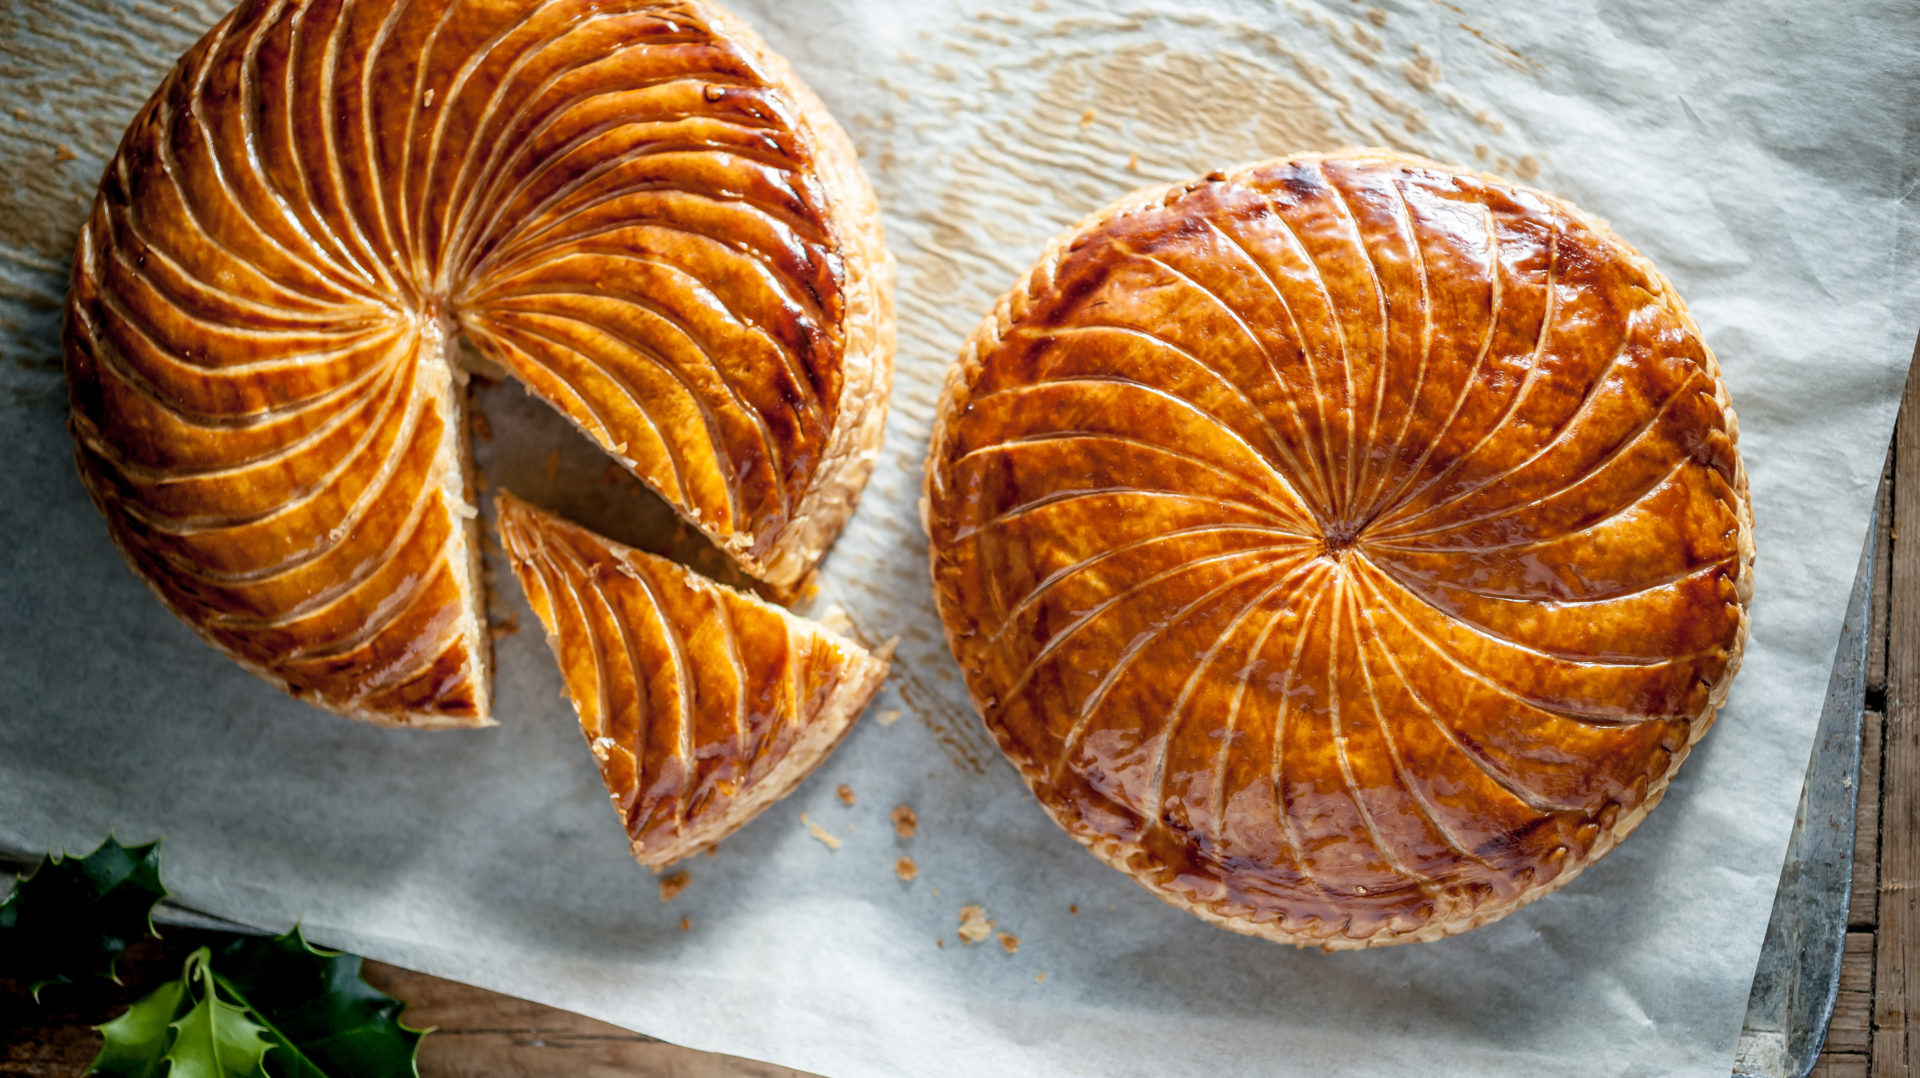 La Galette des rois-The cake of Kings – Cooking with Frenchy